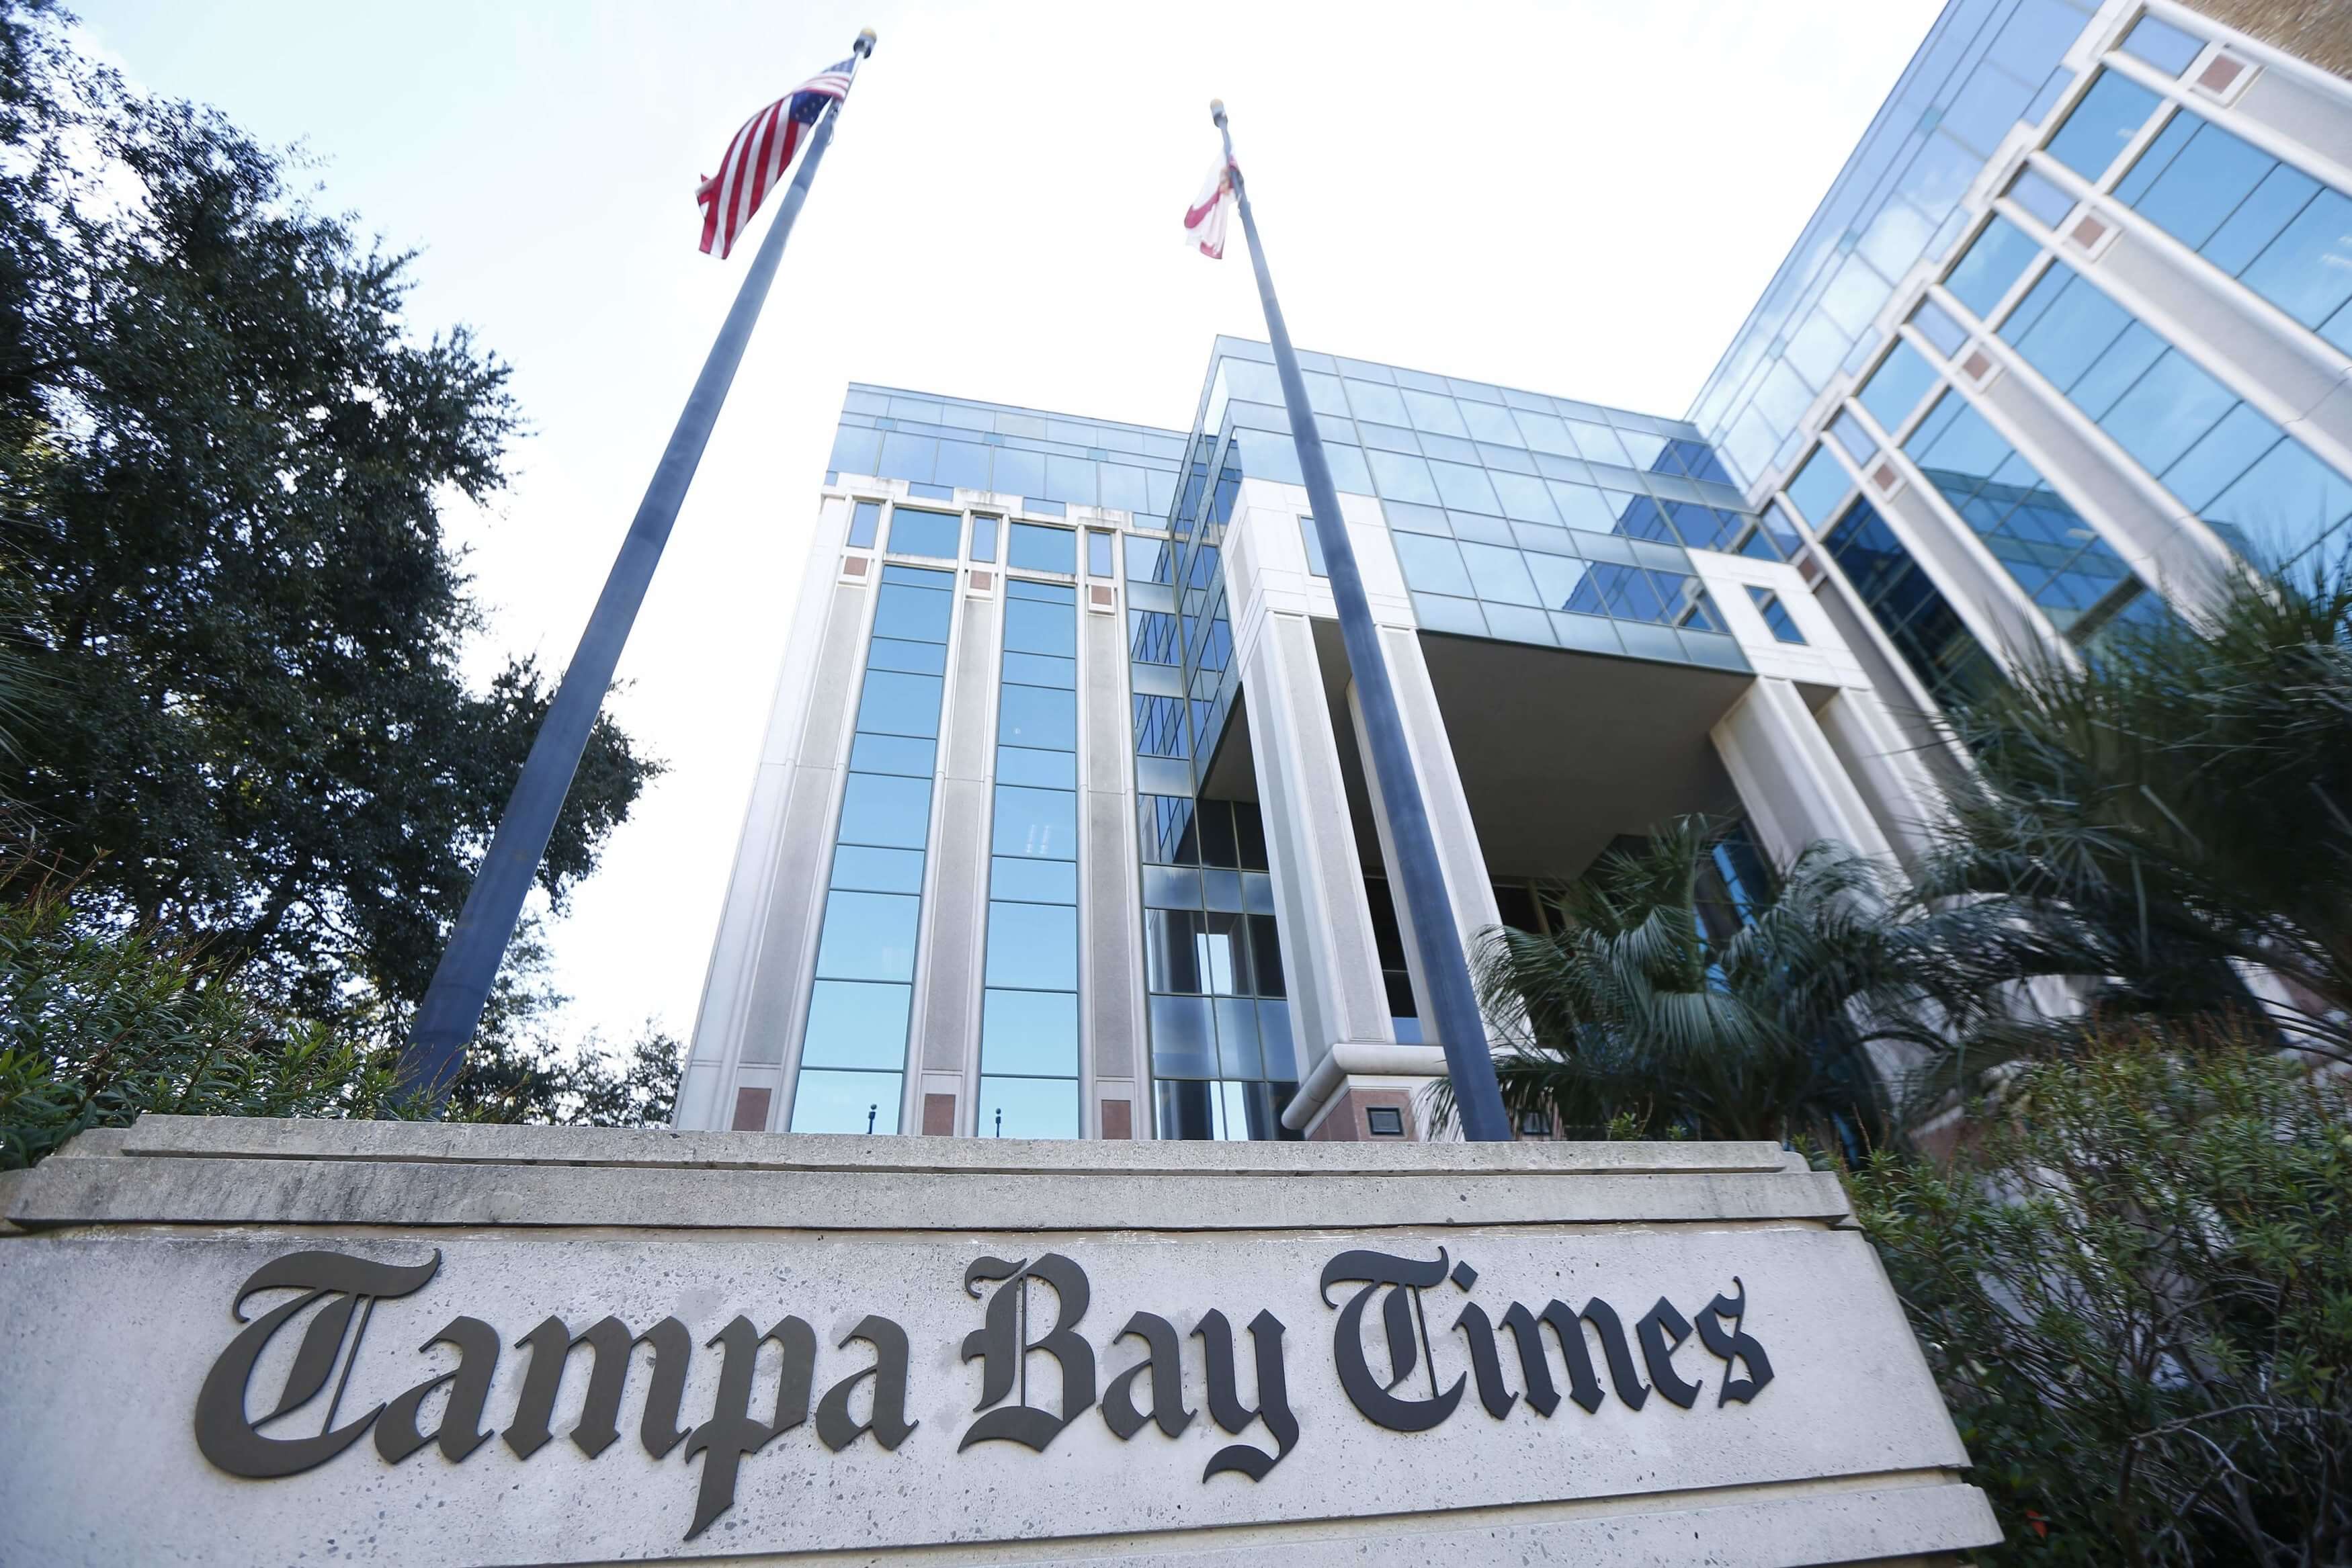 Tampa Bay Times Buildings